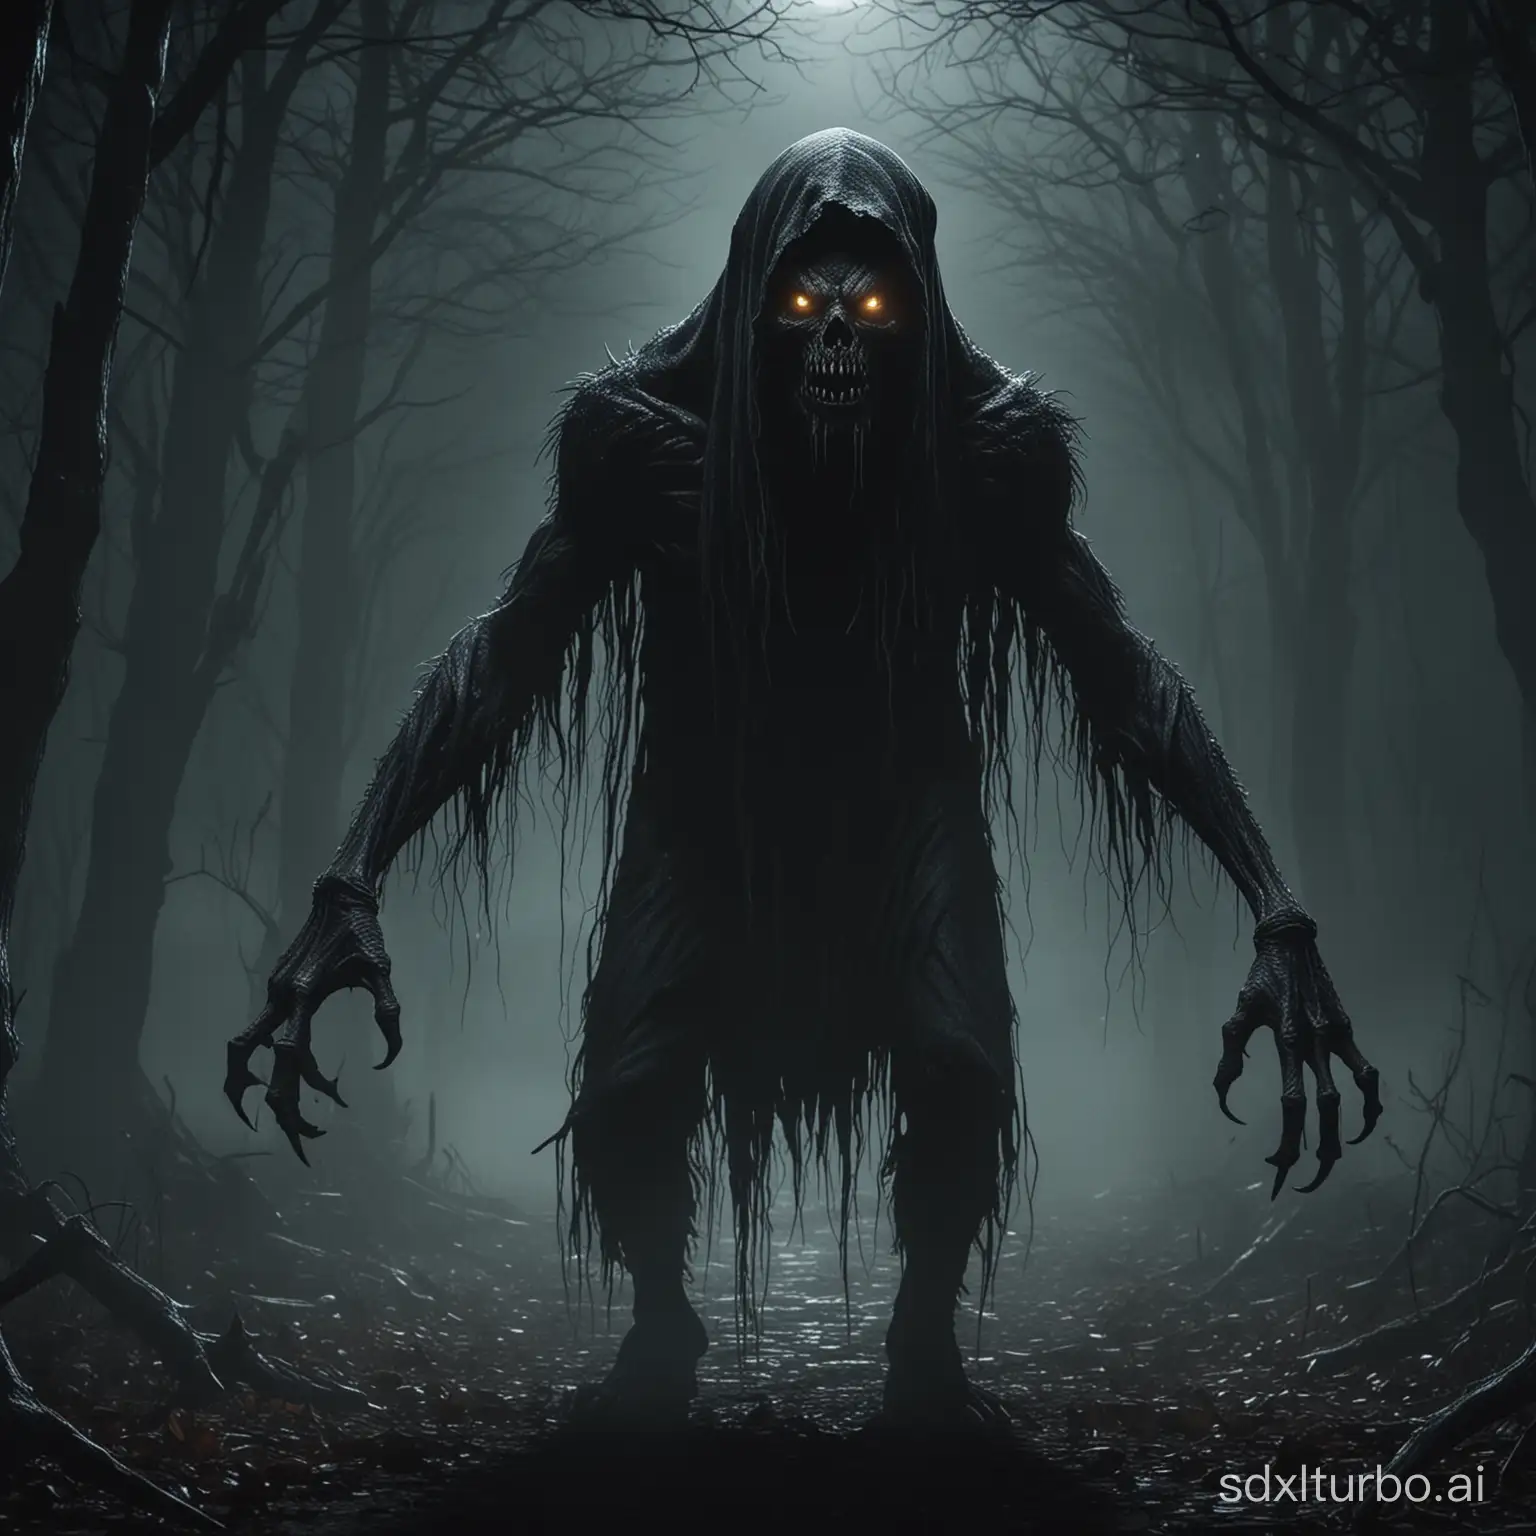 Create a scary looking creature lurking in the dark